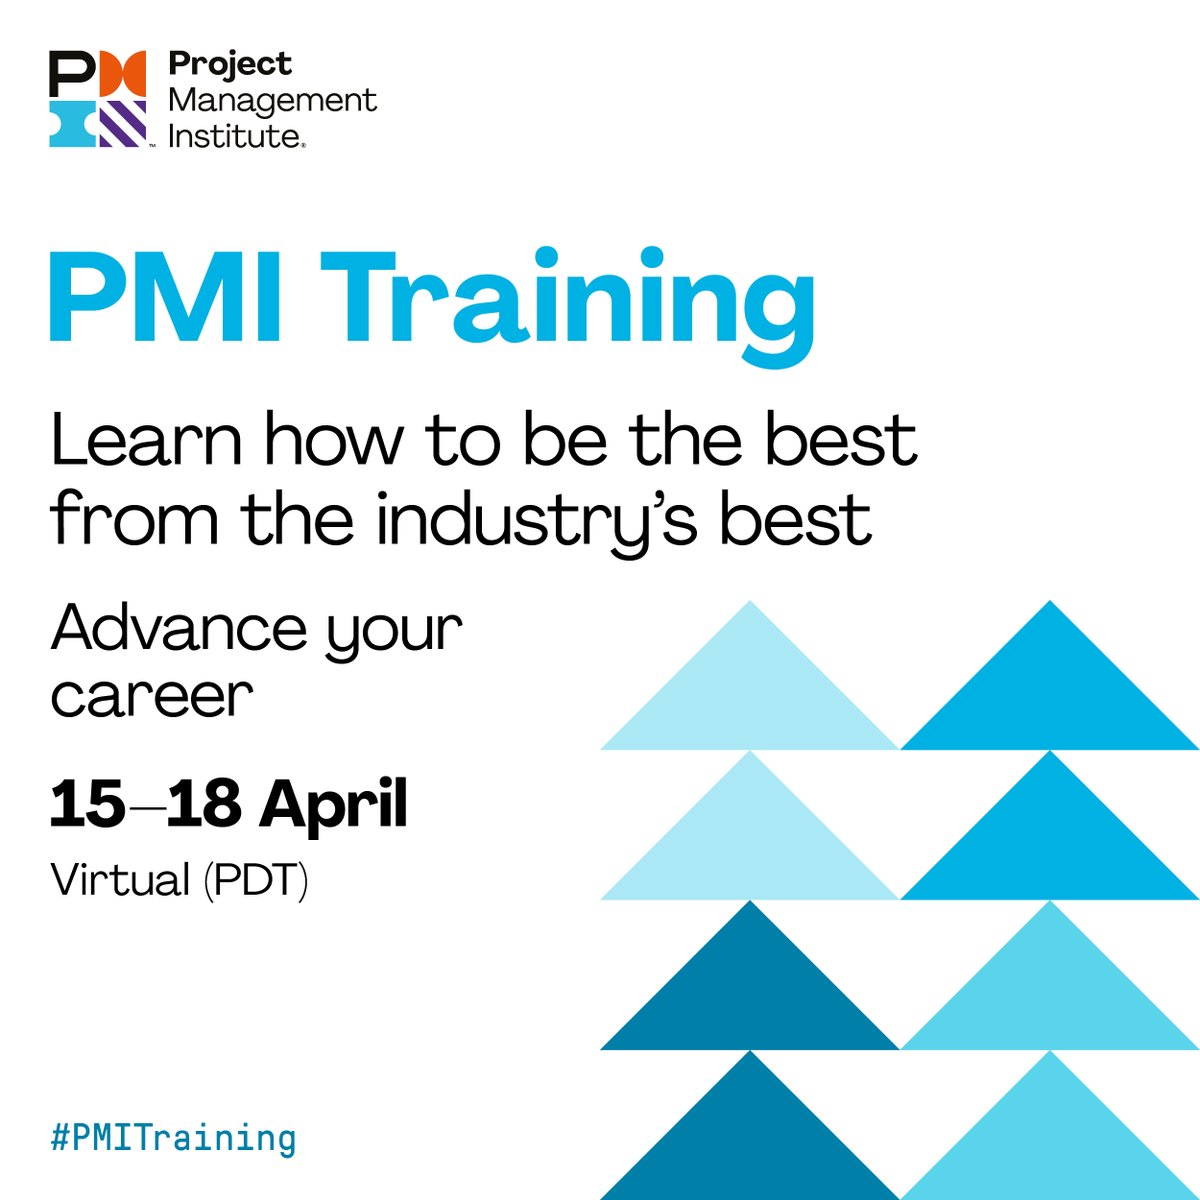 Project managers: Unlock your potential 
with our expert-led courses by attending virtual PMI Training in April. View the courses and register here: sprou.tt/1xWtFz4TBij 
#pmitraining